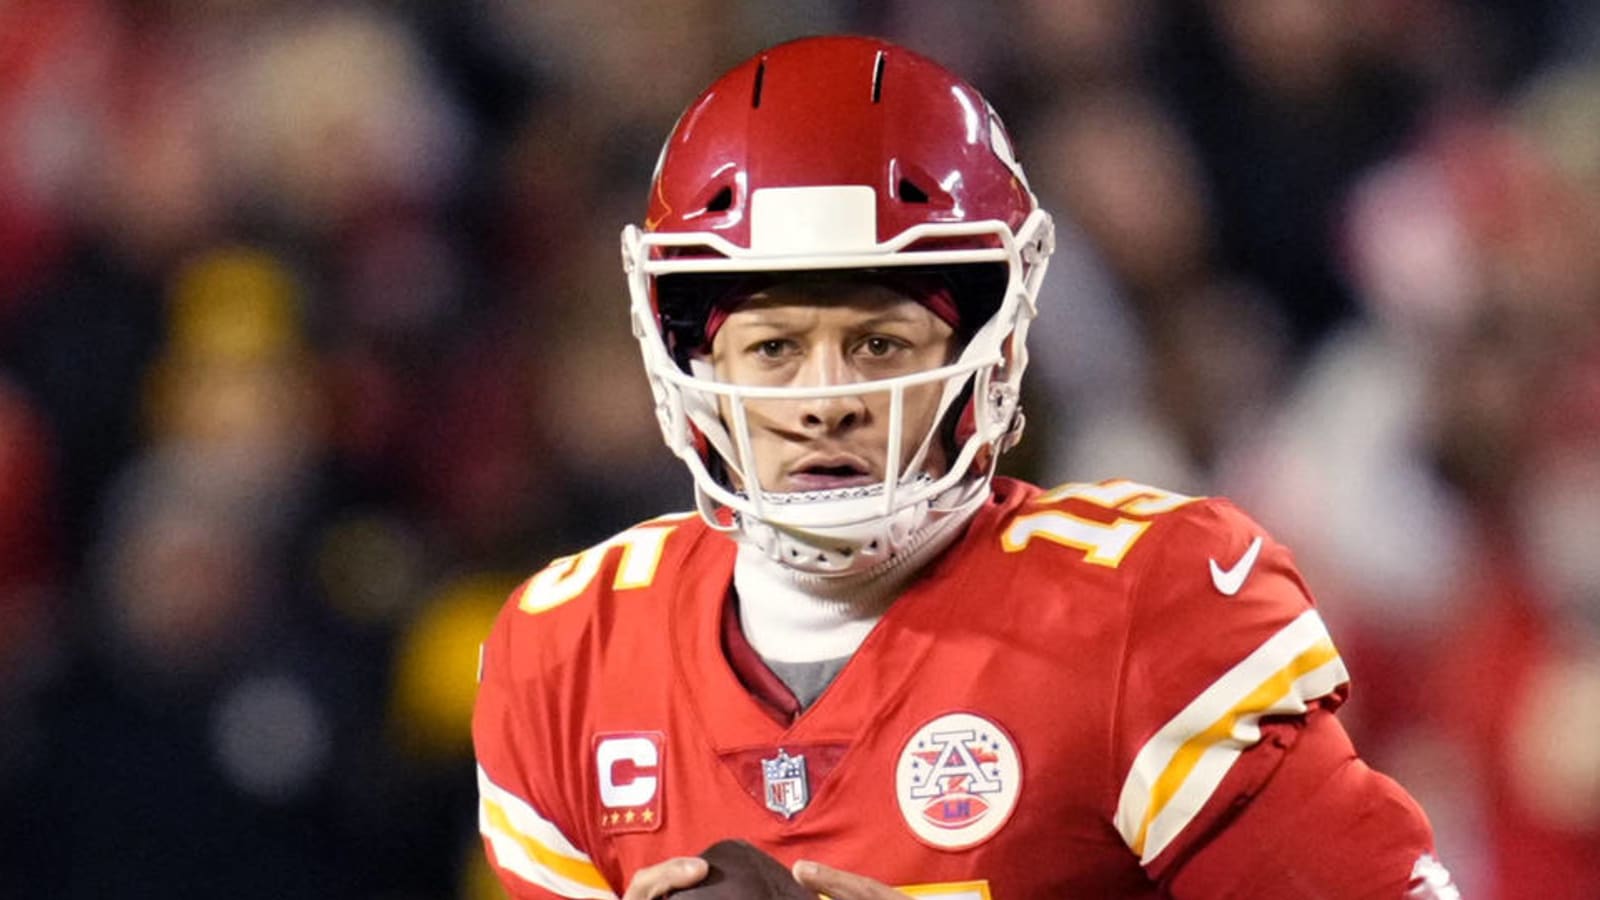 Watch: Patrick Mahomes putting on an absolute show against the Steelers